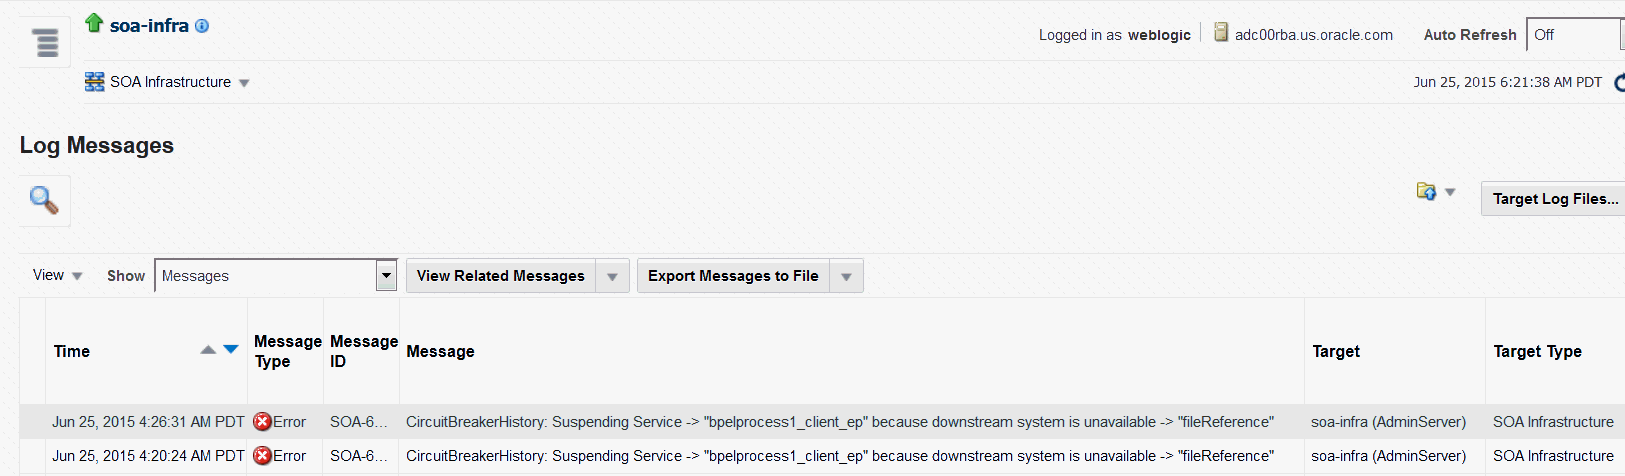 Log Messages page